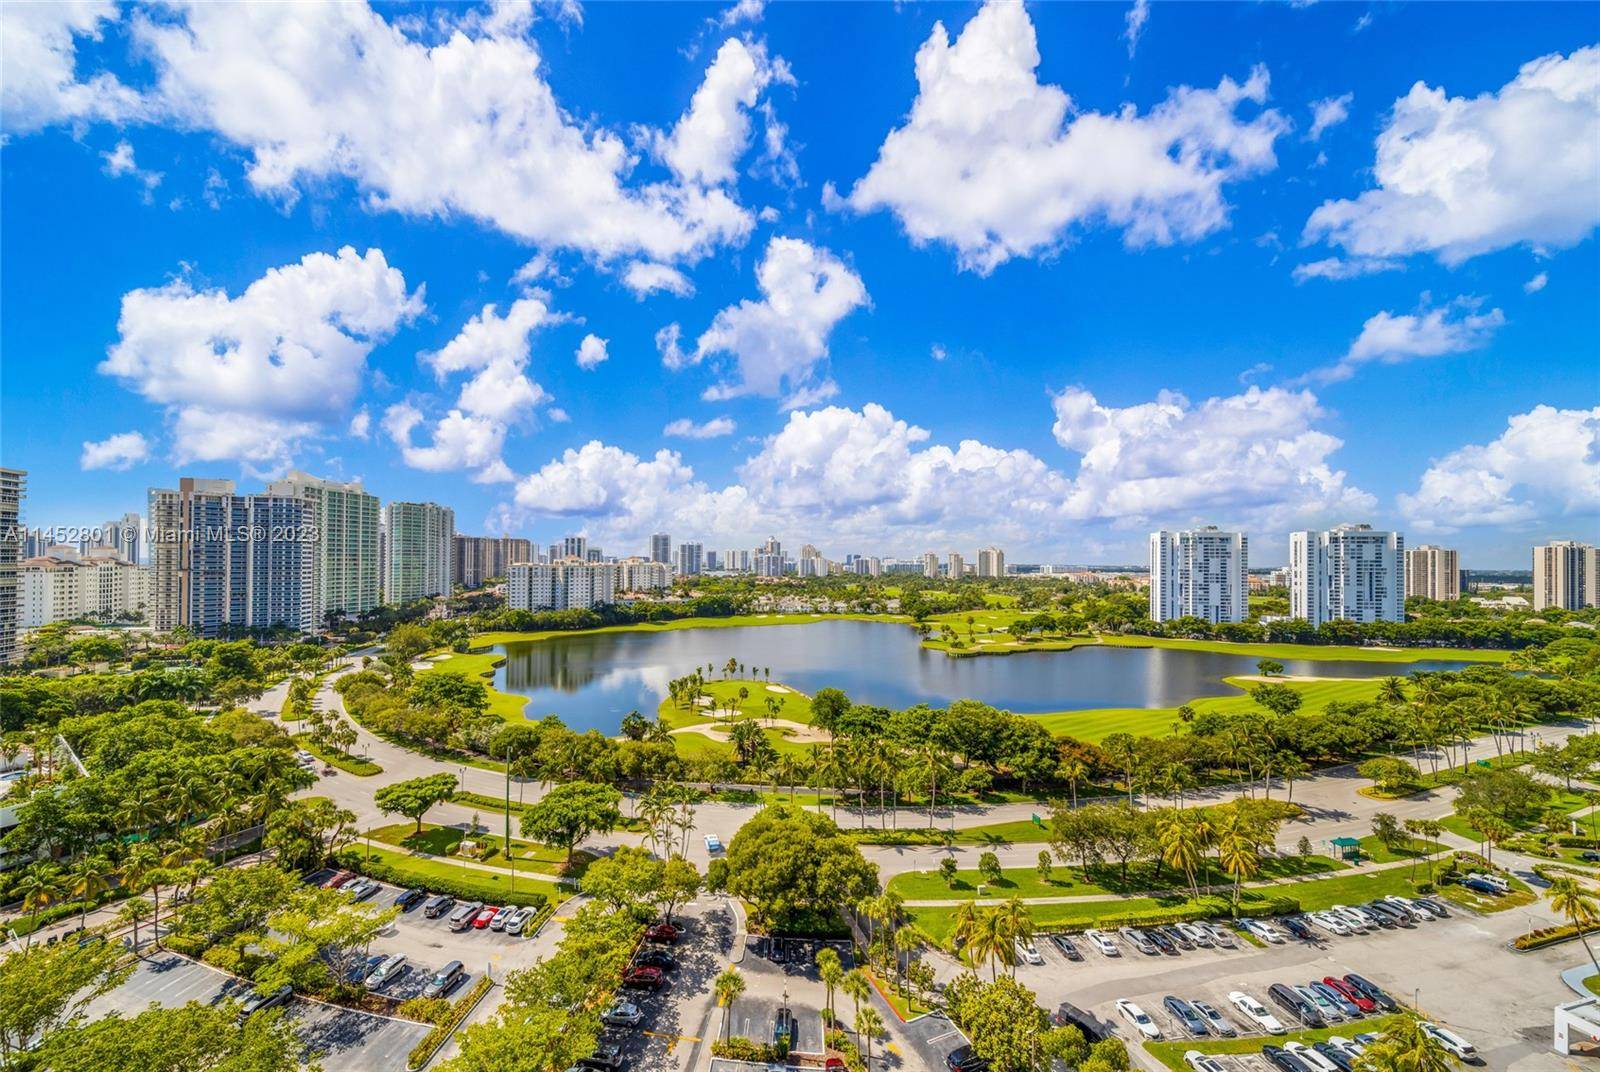 This spectacular Apartment has two bedrooms, two baths, storage, one parking space, and premium views of Aventura Golf Club and Sunny Isles Beach.